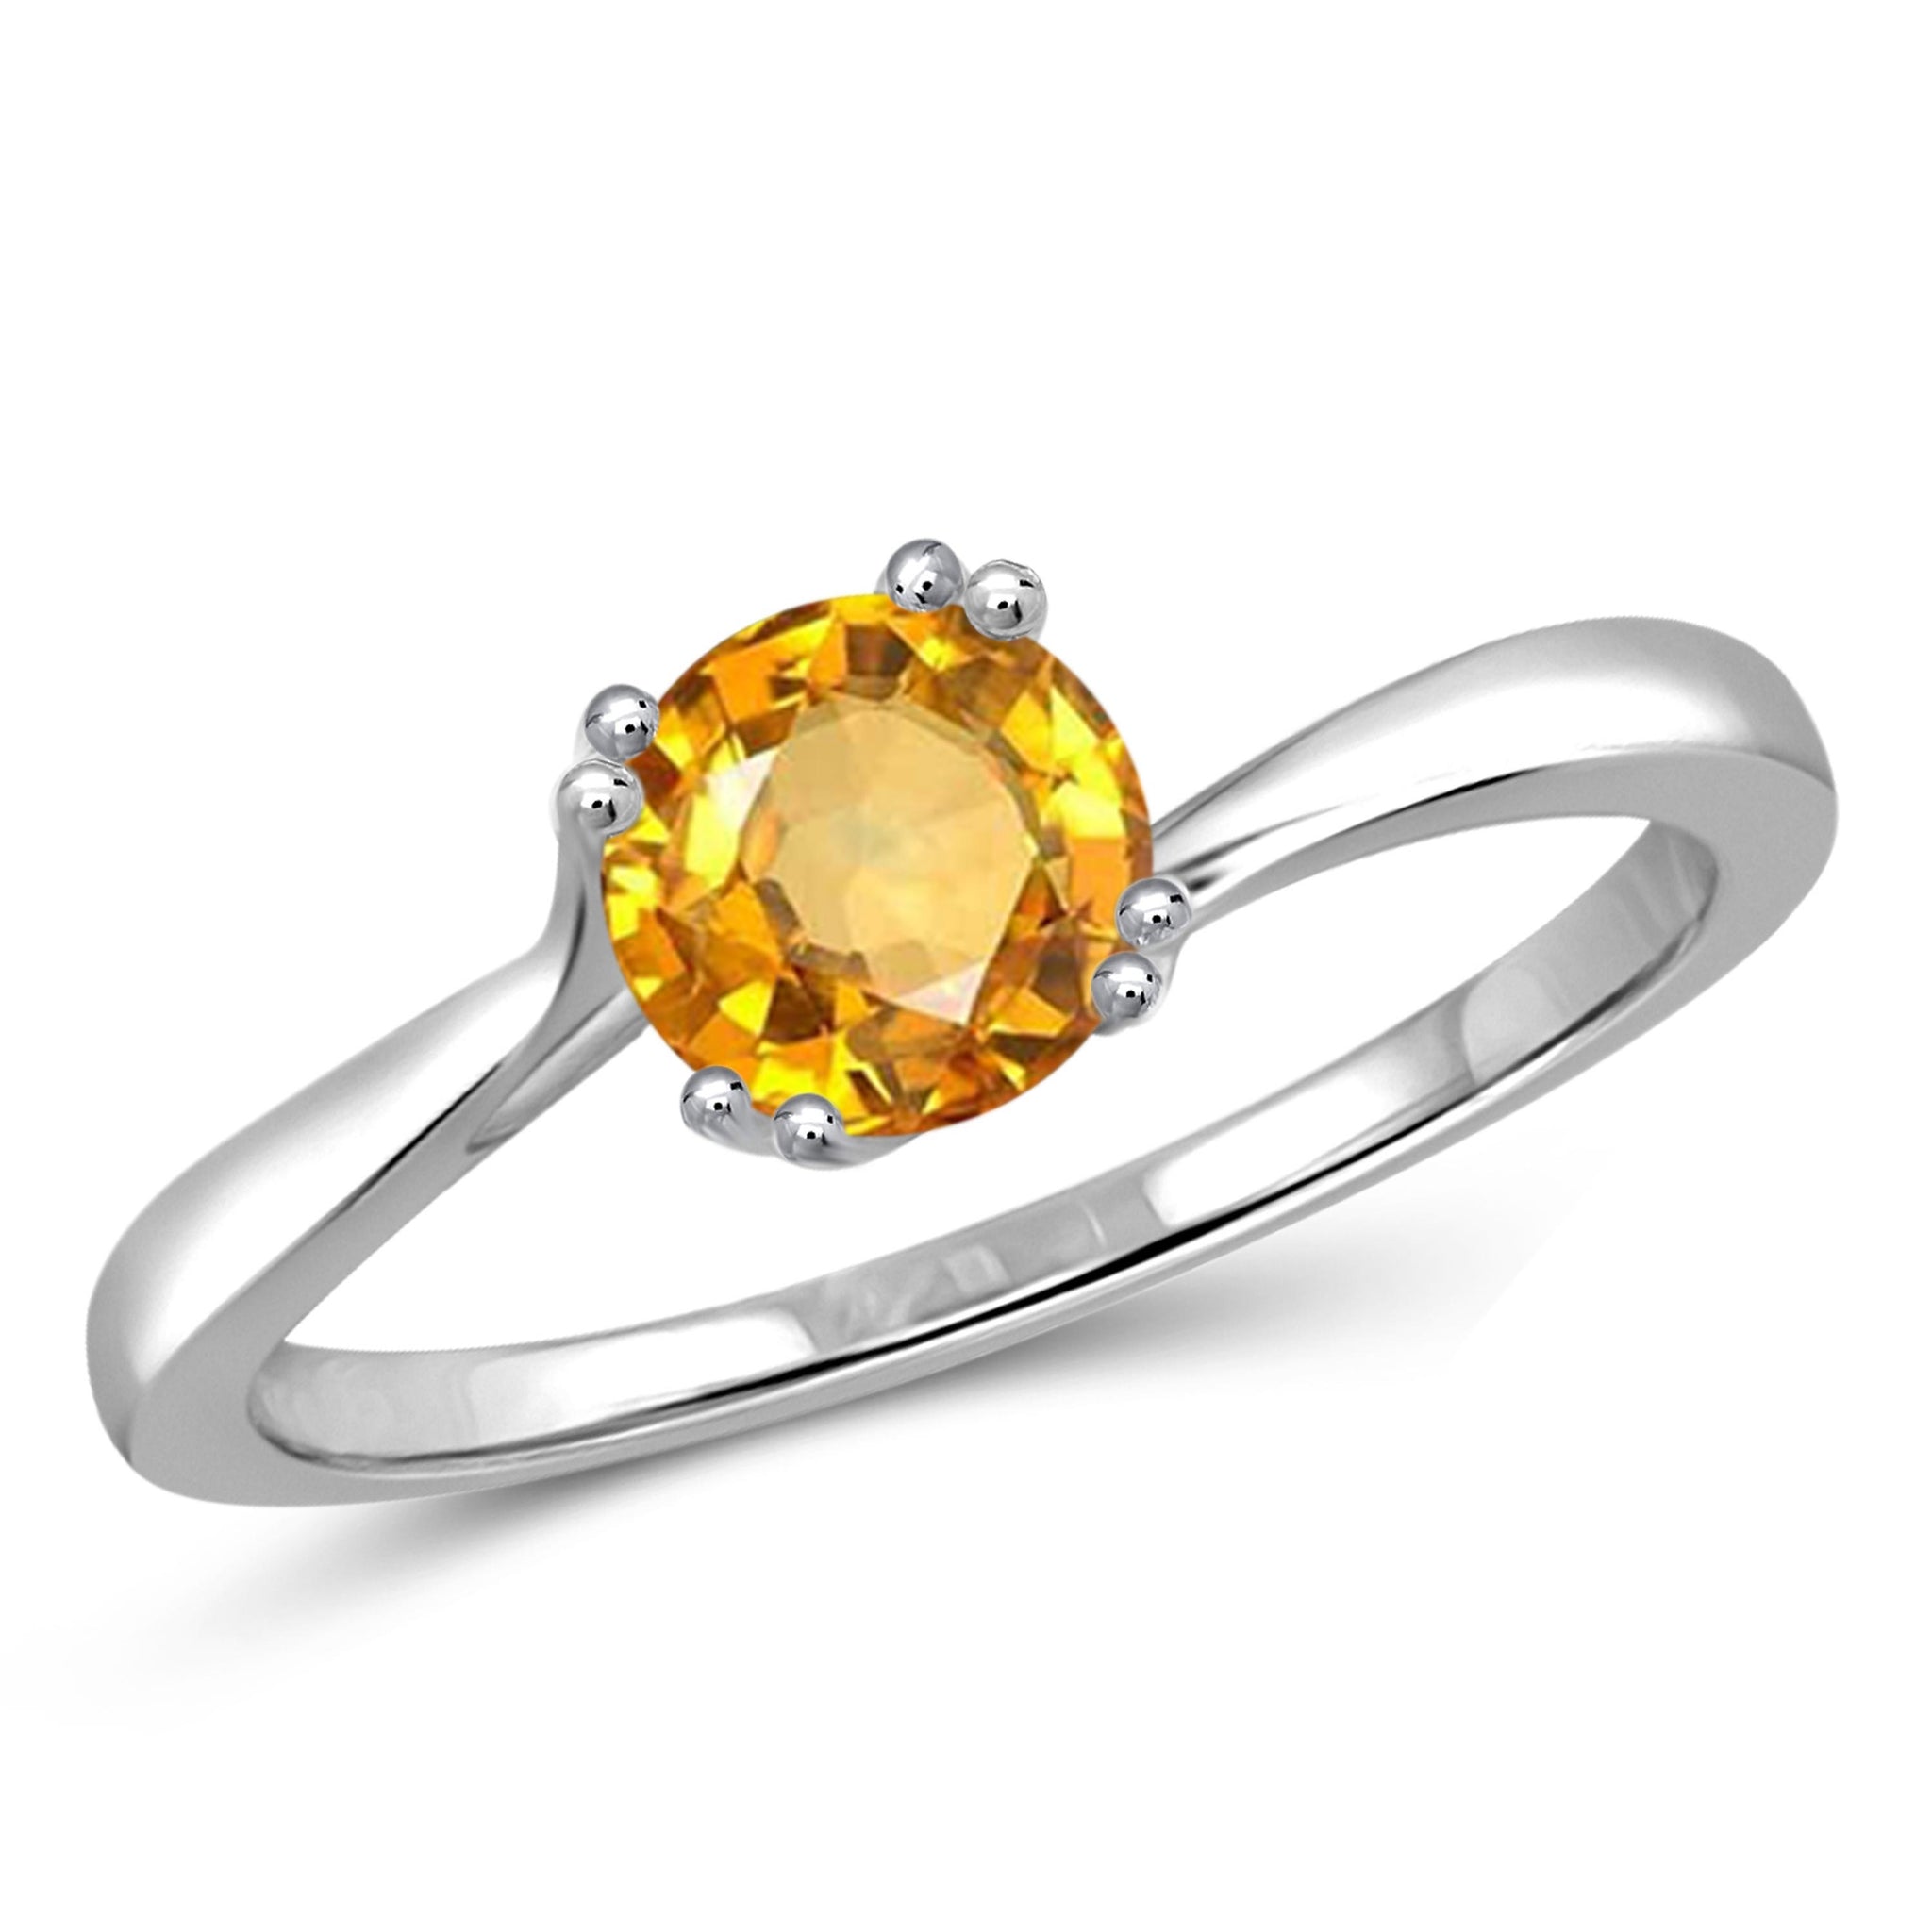 JewelonFire 1/2 Carat T.G.W. Citrine Sterling Silver Ring - Assorted Colors